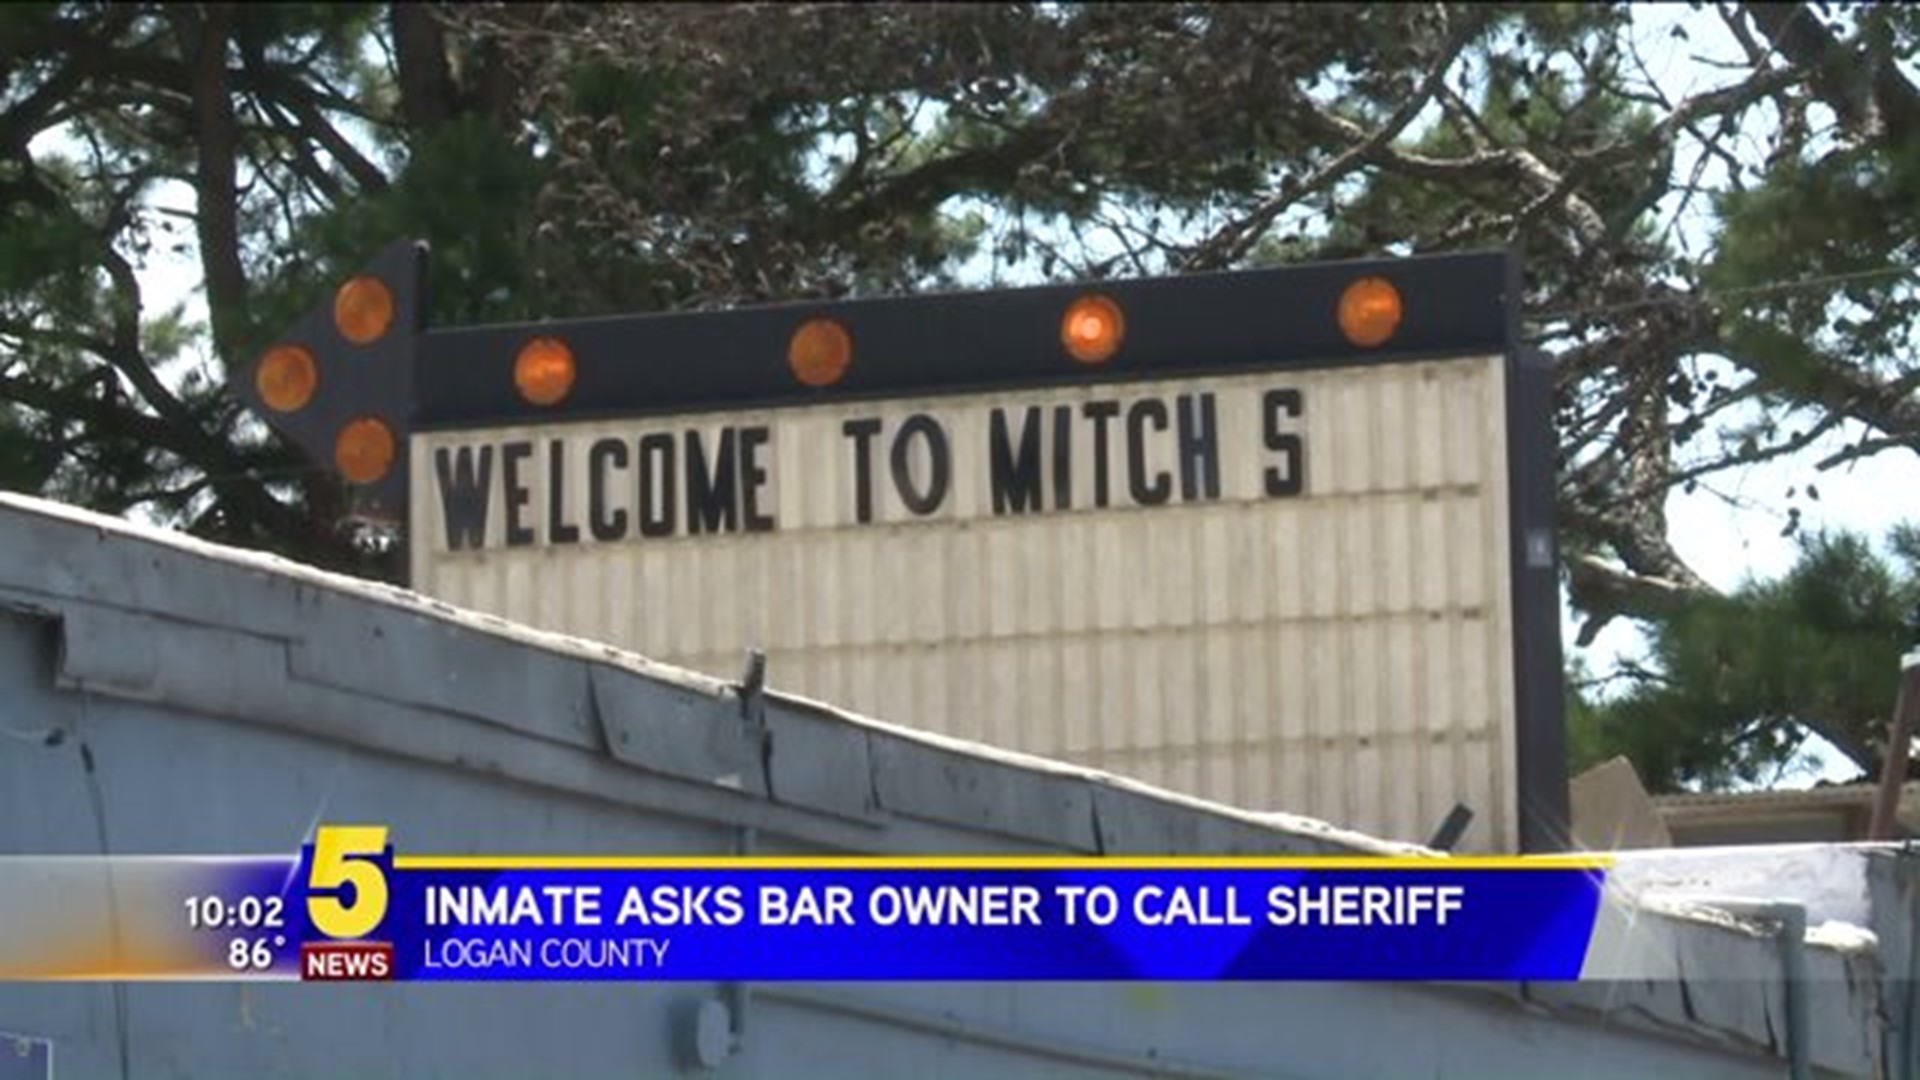 Escaped Inmate Arrested After Asking Bar Owner To Call Sheriff